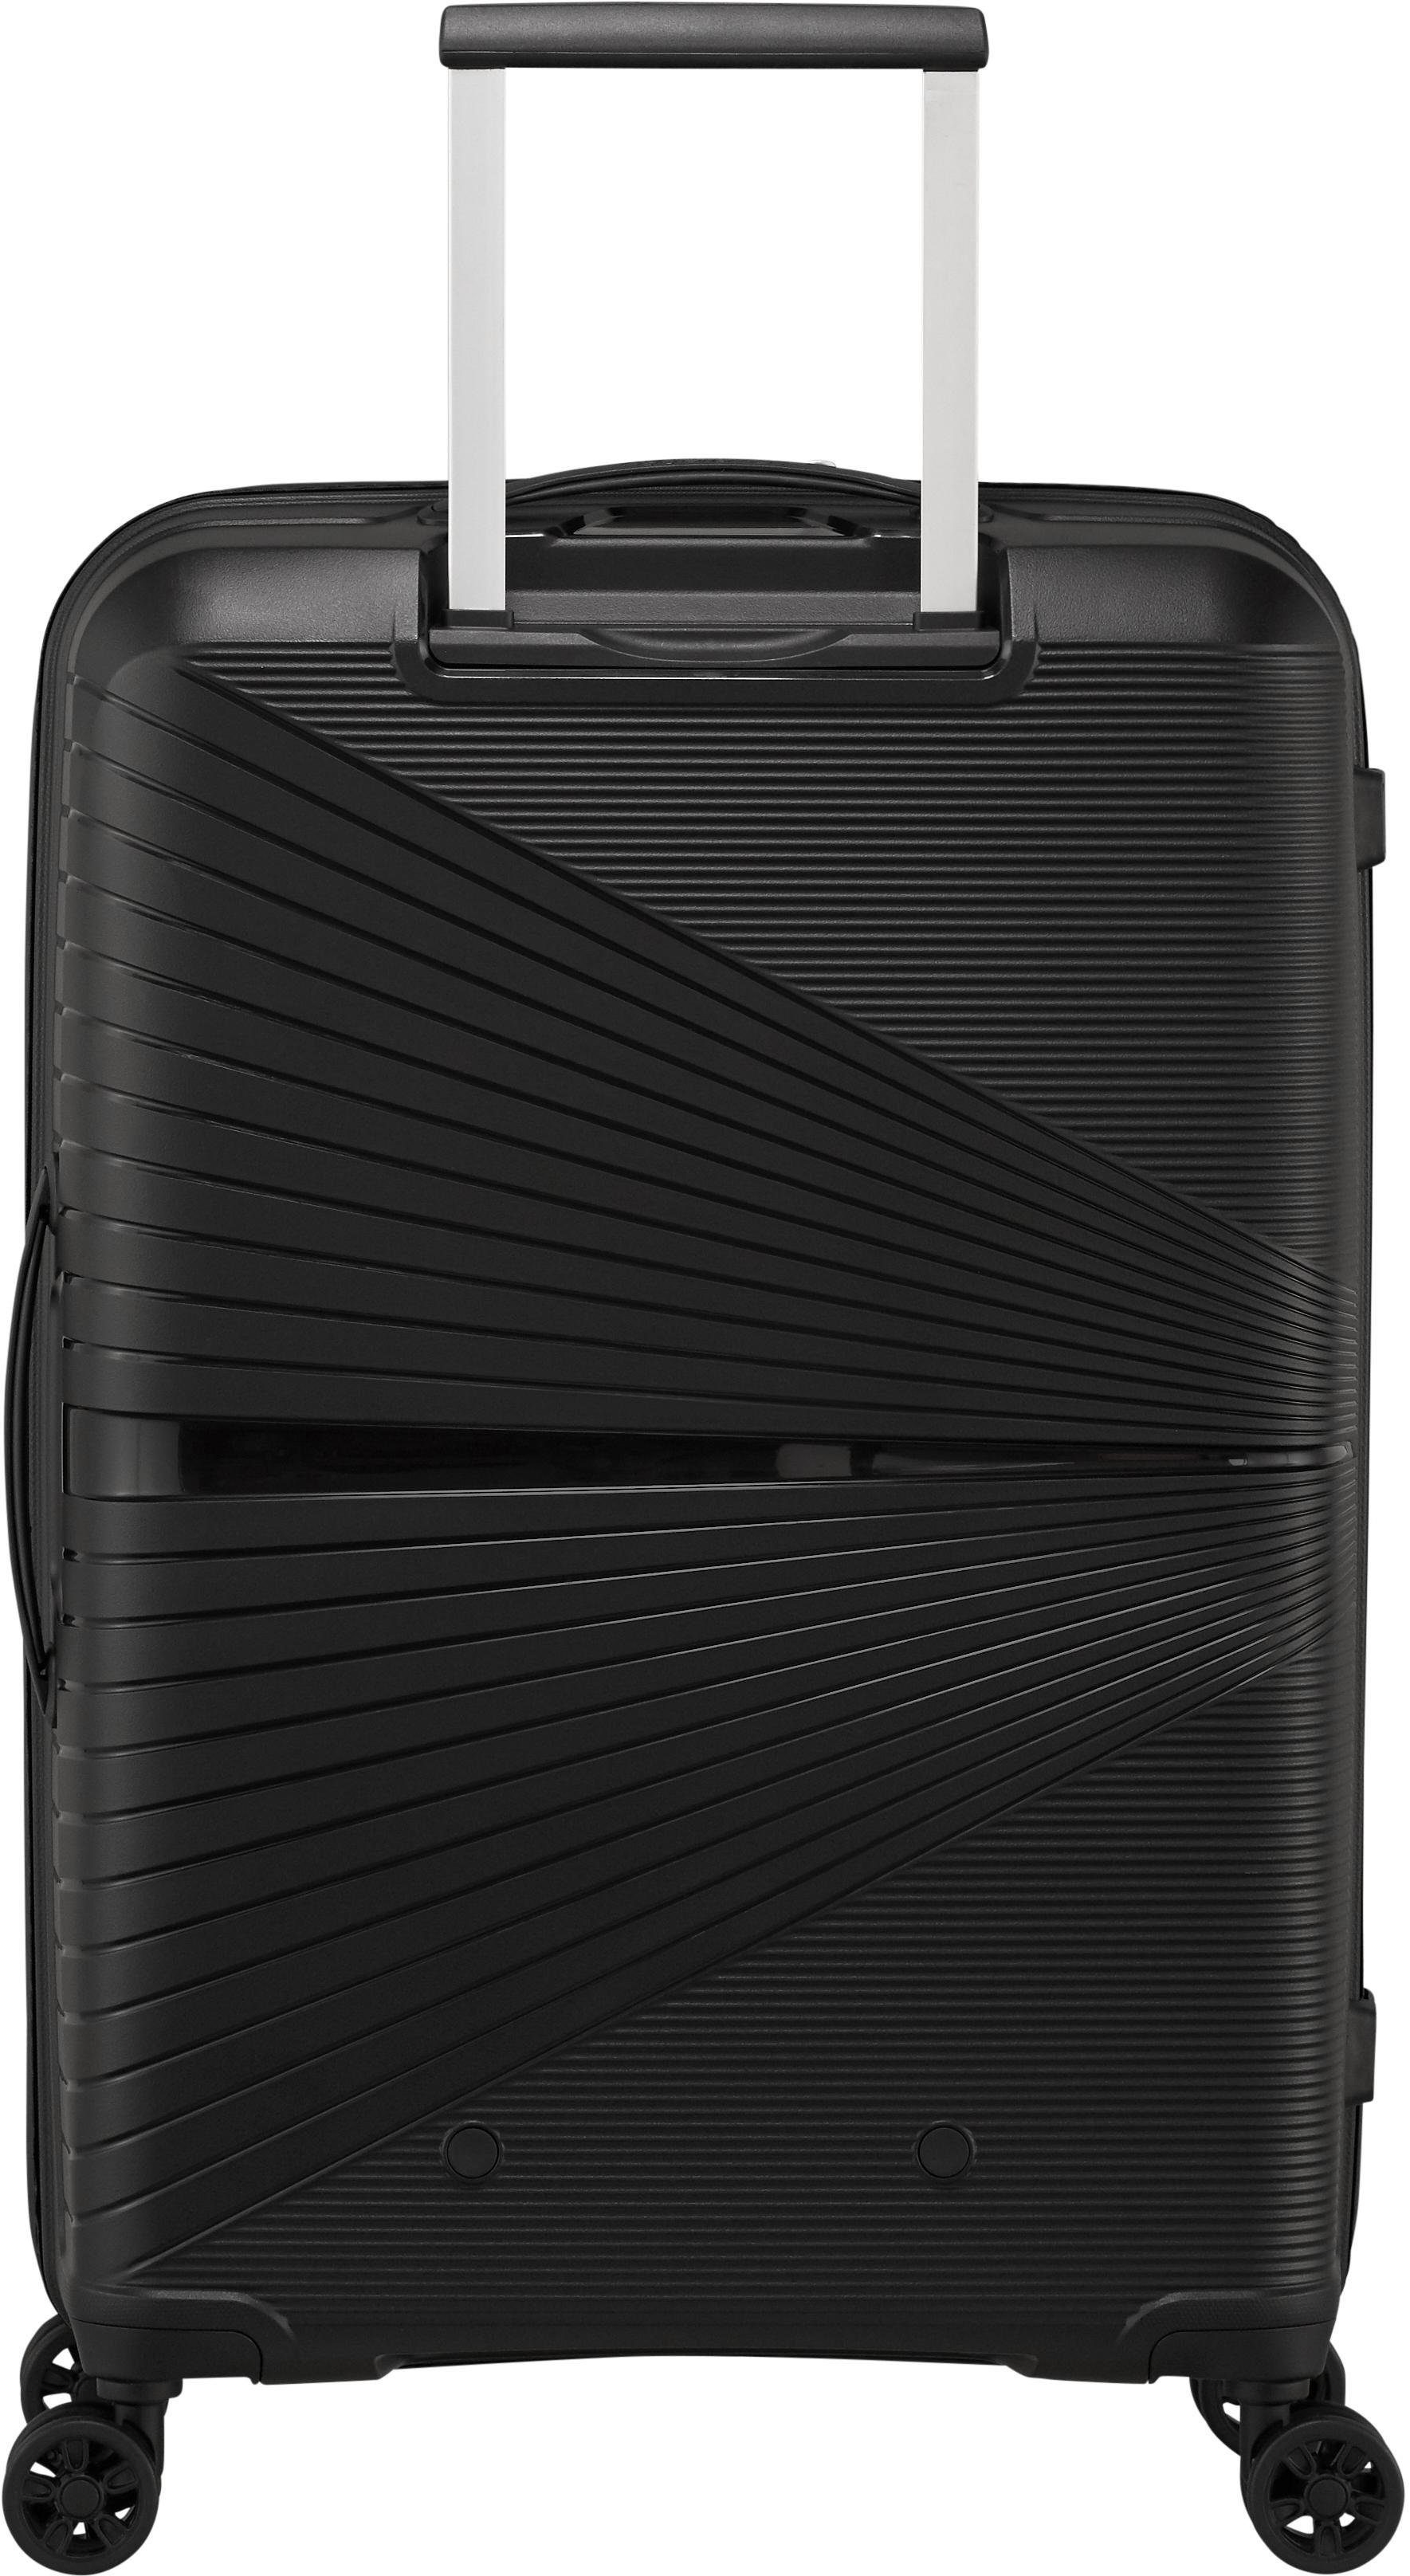 Onyx Rollen American Spinner Black 67, Tourister® 4 Koffer AIRCONIC